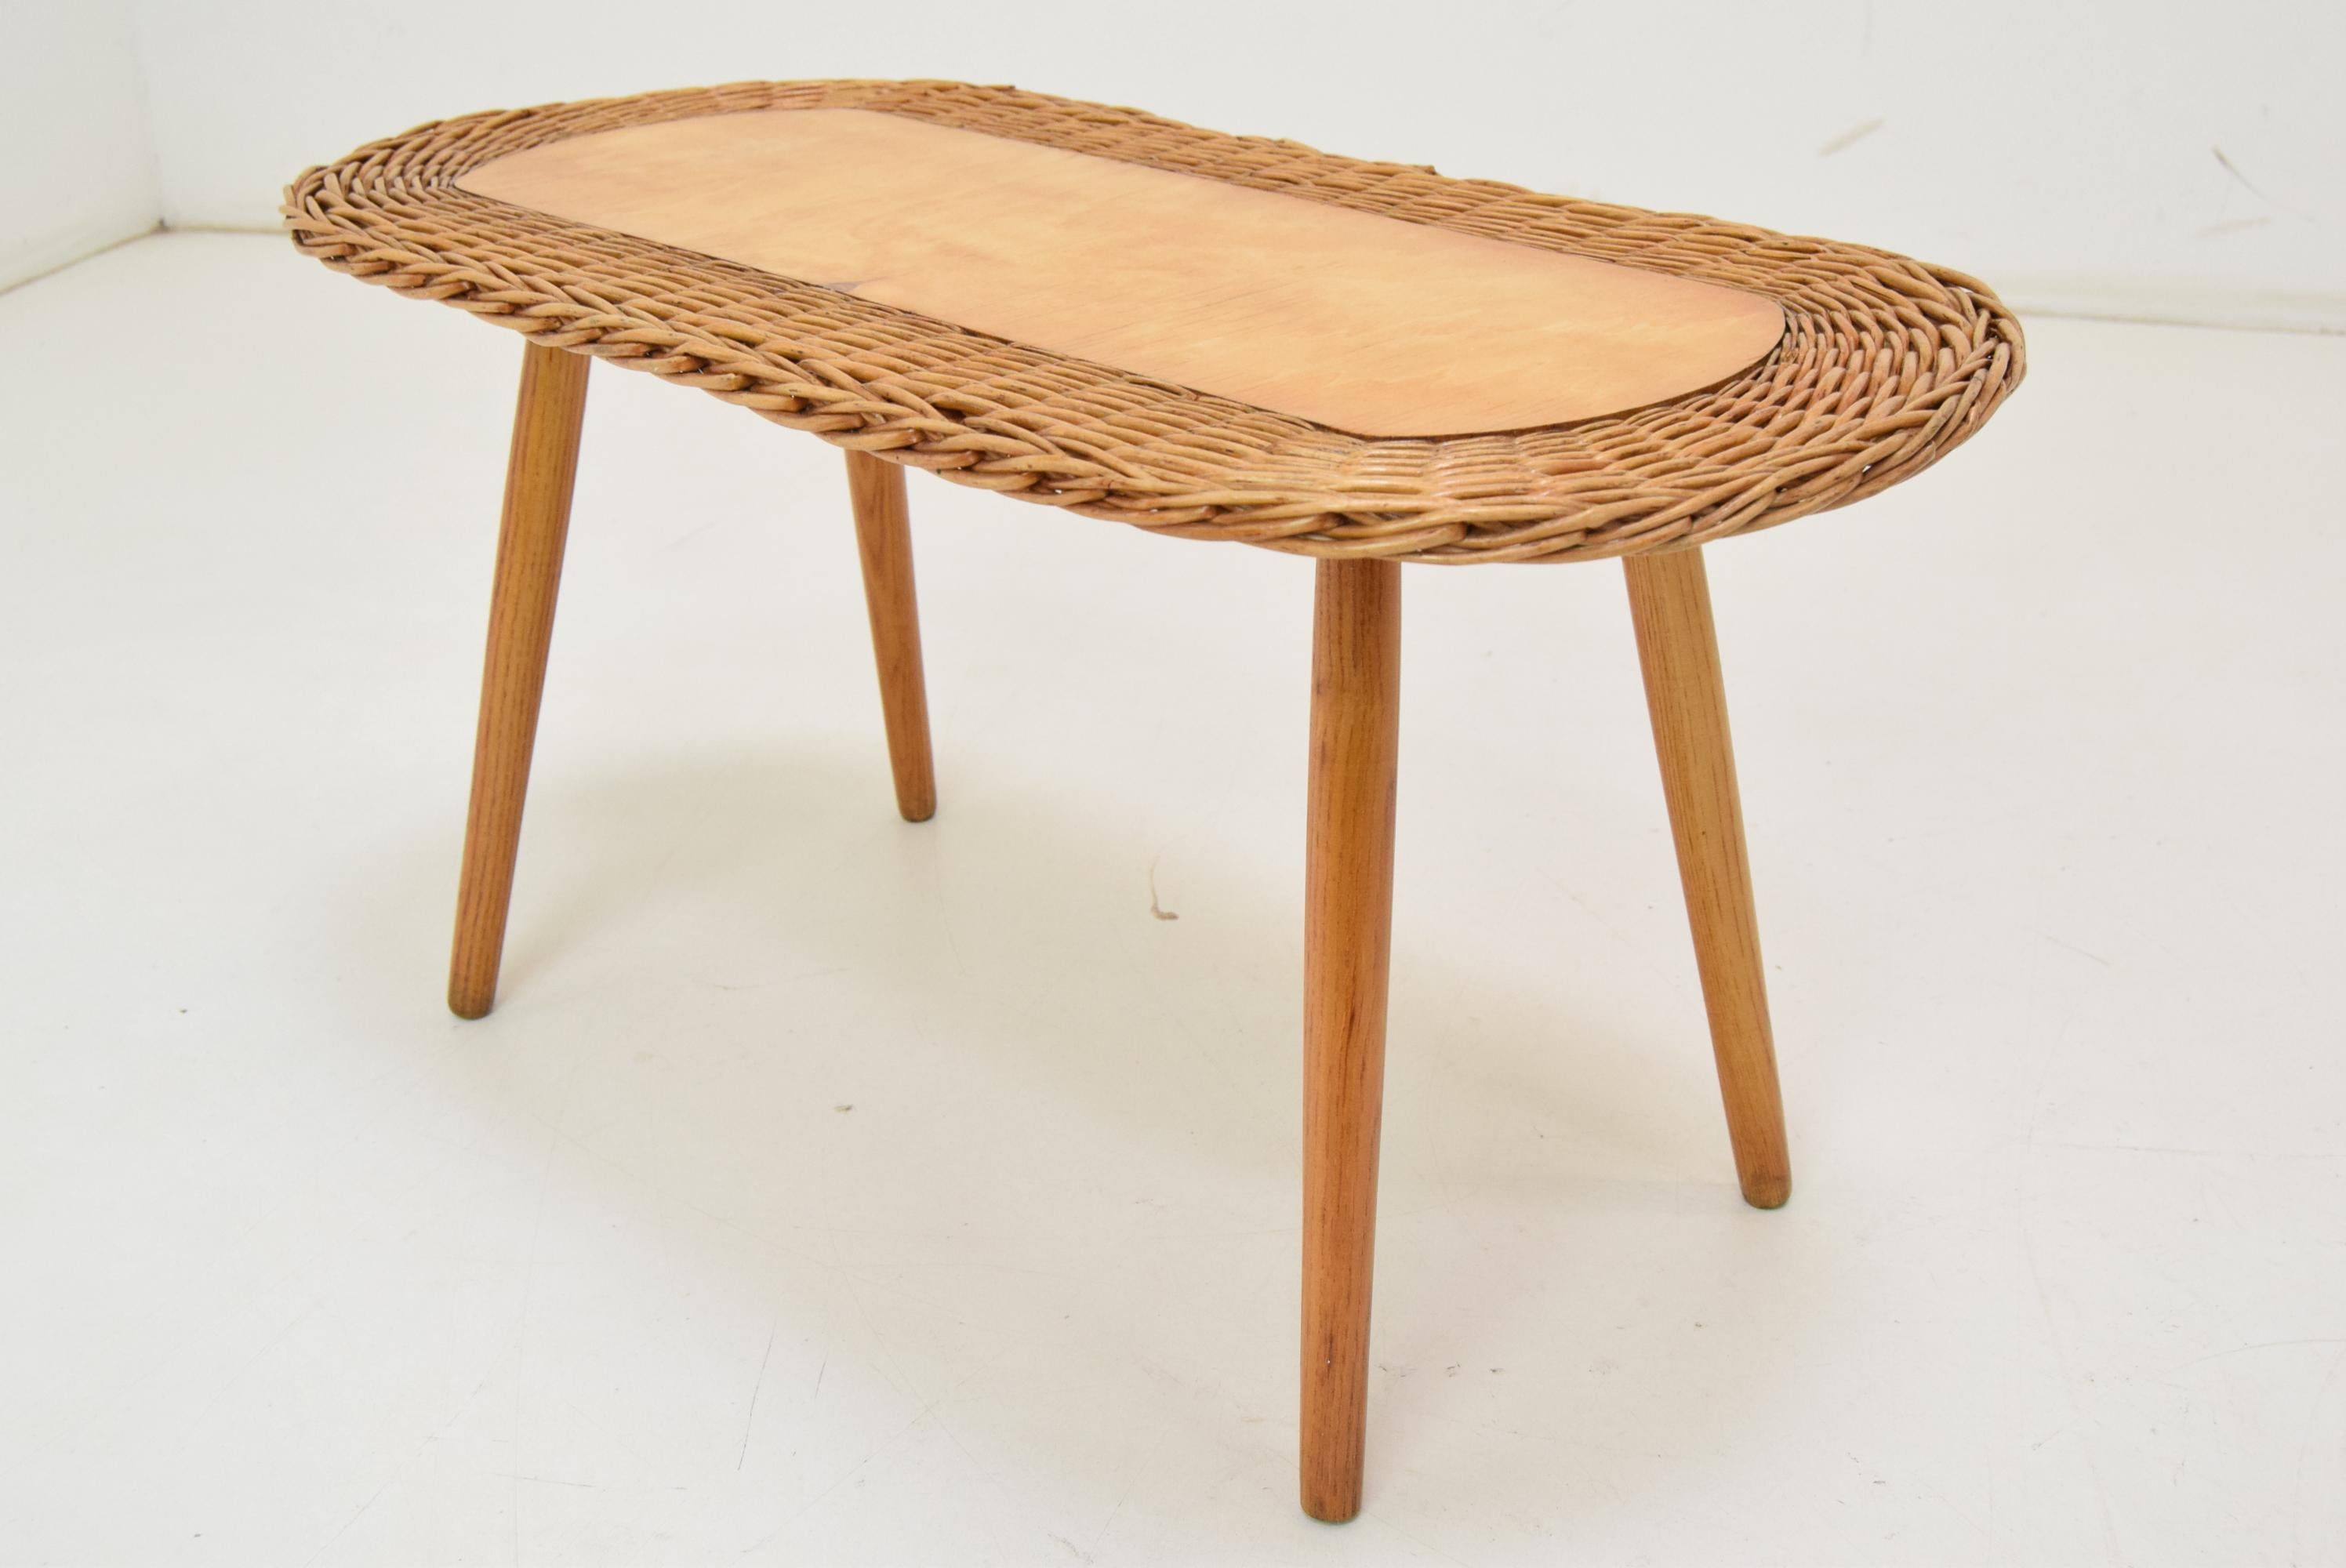 Rattan Side Table by Jan kalous for ULUV, 1970's.  For Sale